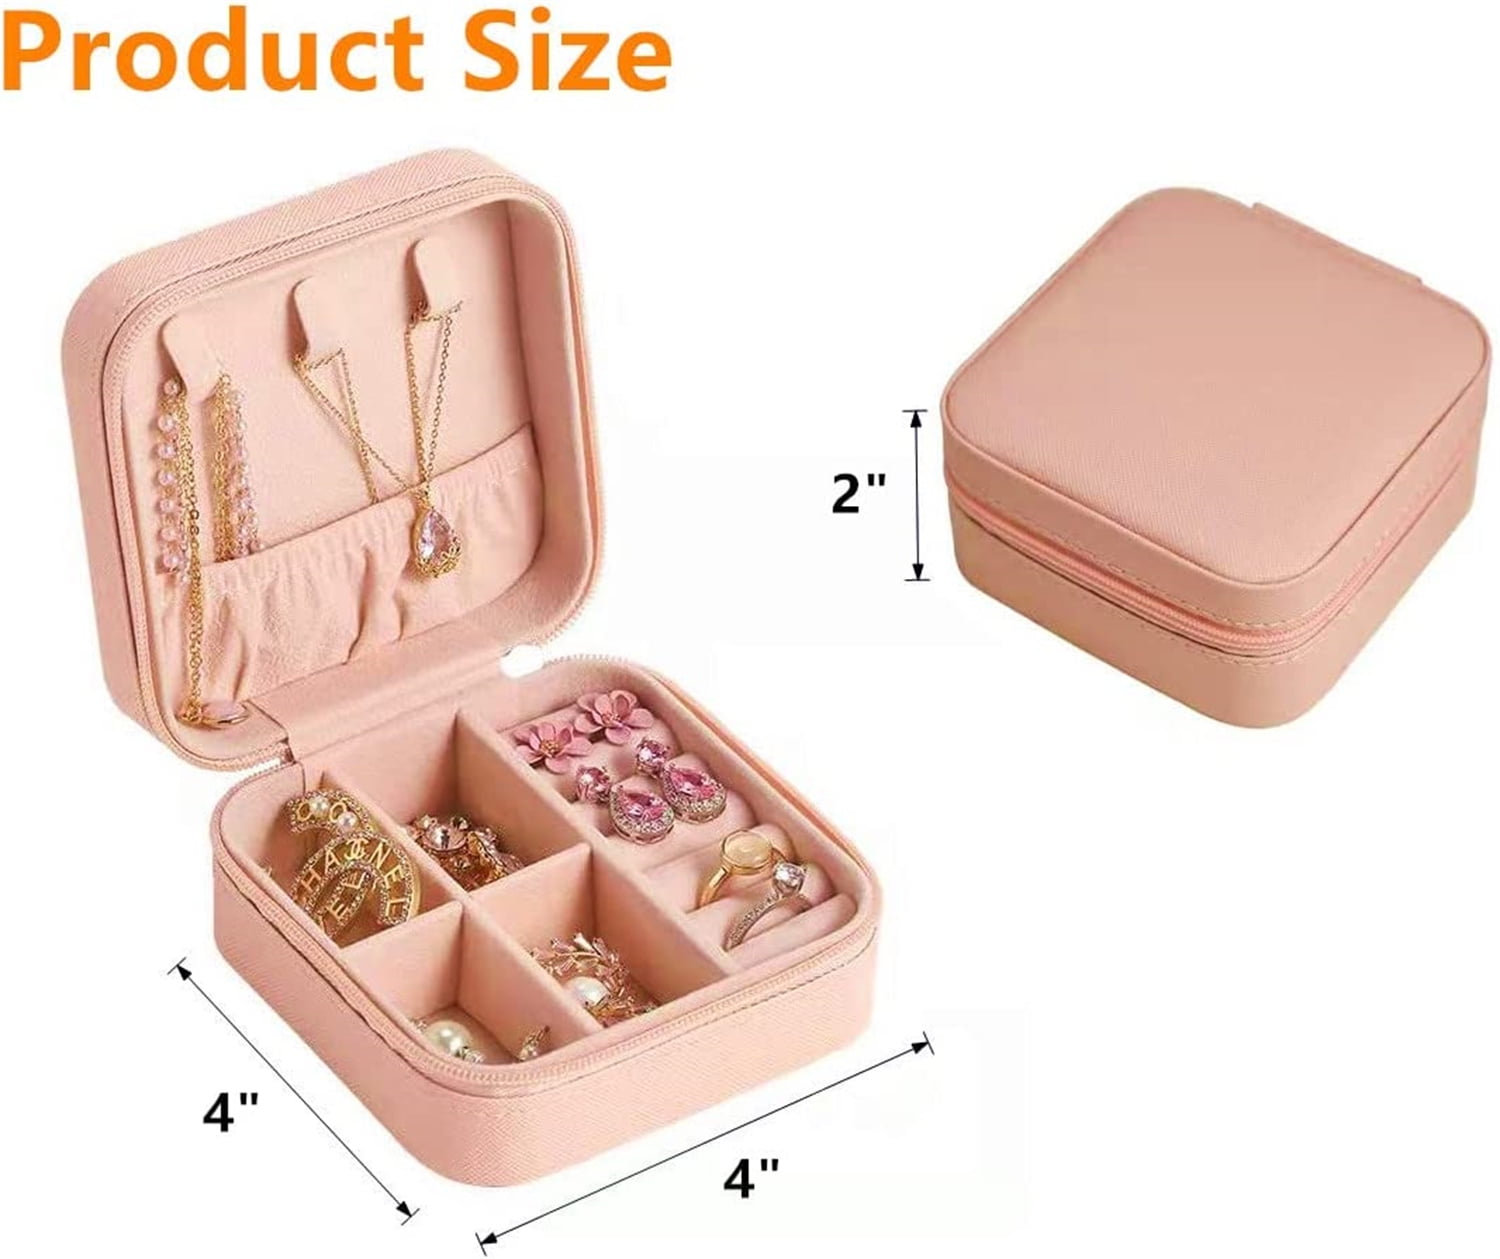 Zumier Jewelry Box Organizer for Women Girls,PU Leather Earring Box  Organizer with Diamond Button for Christmas and New Year Gifts-Pink